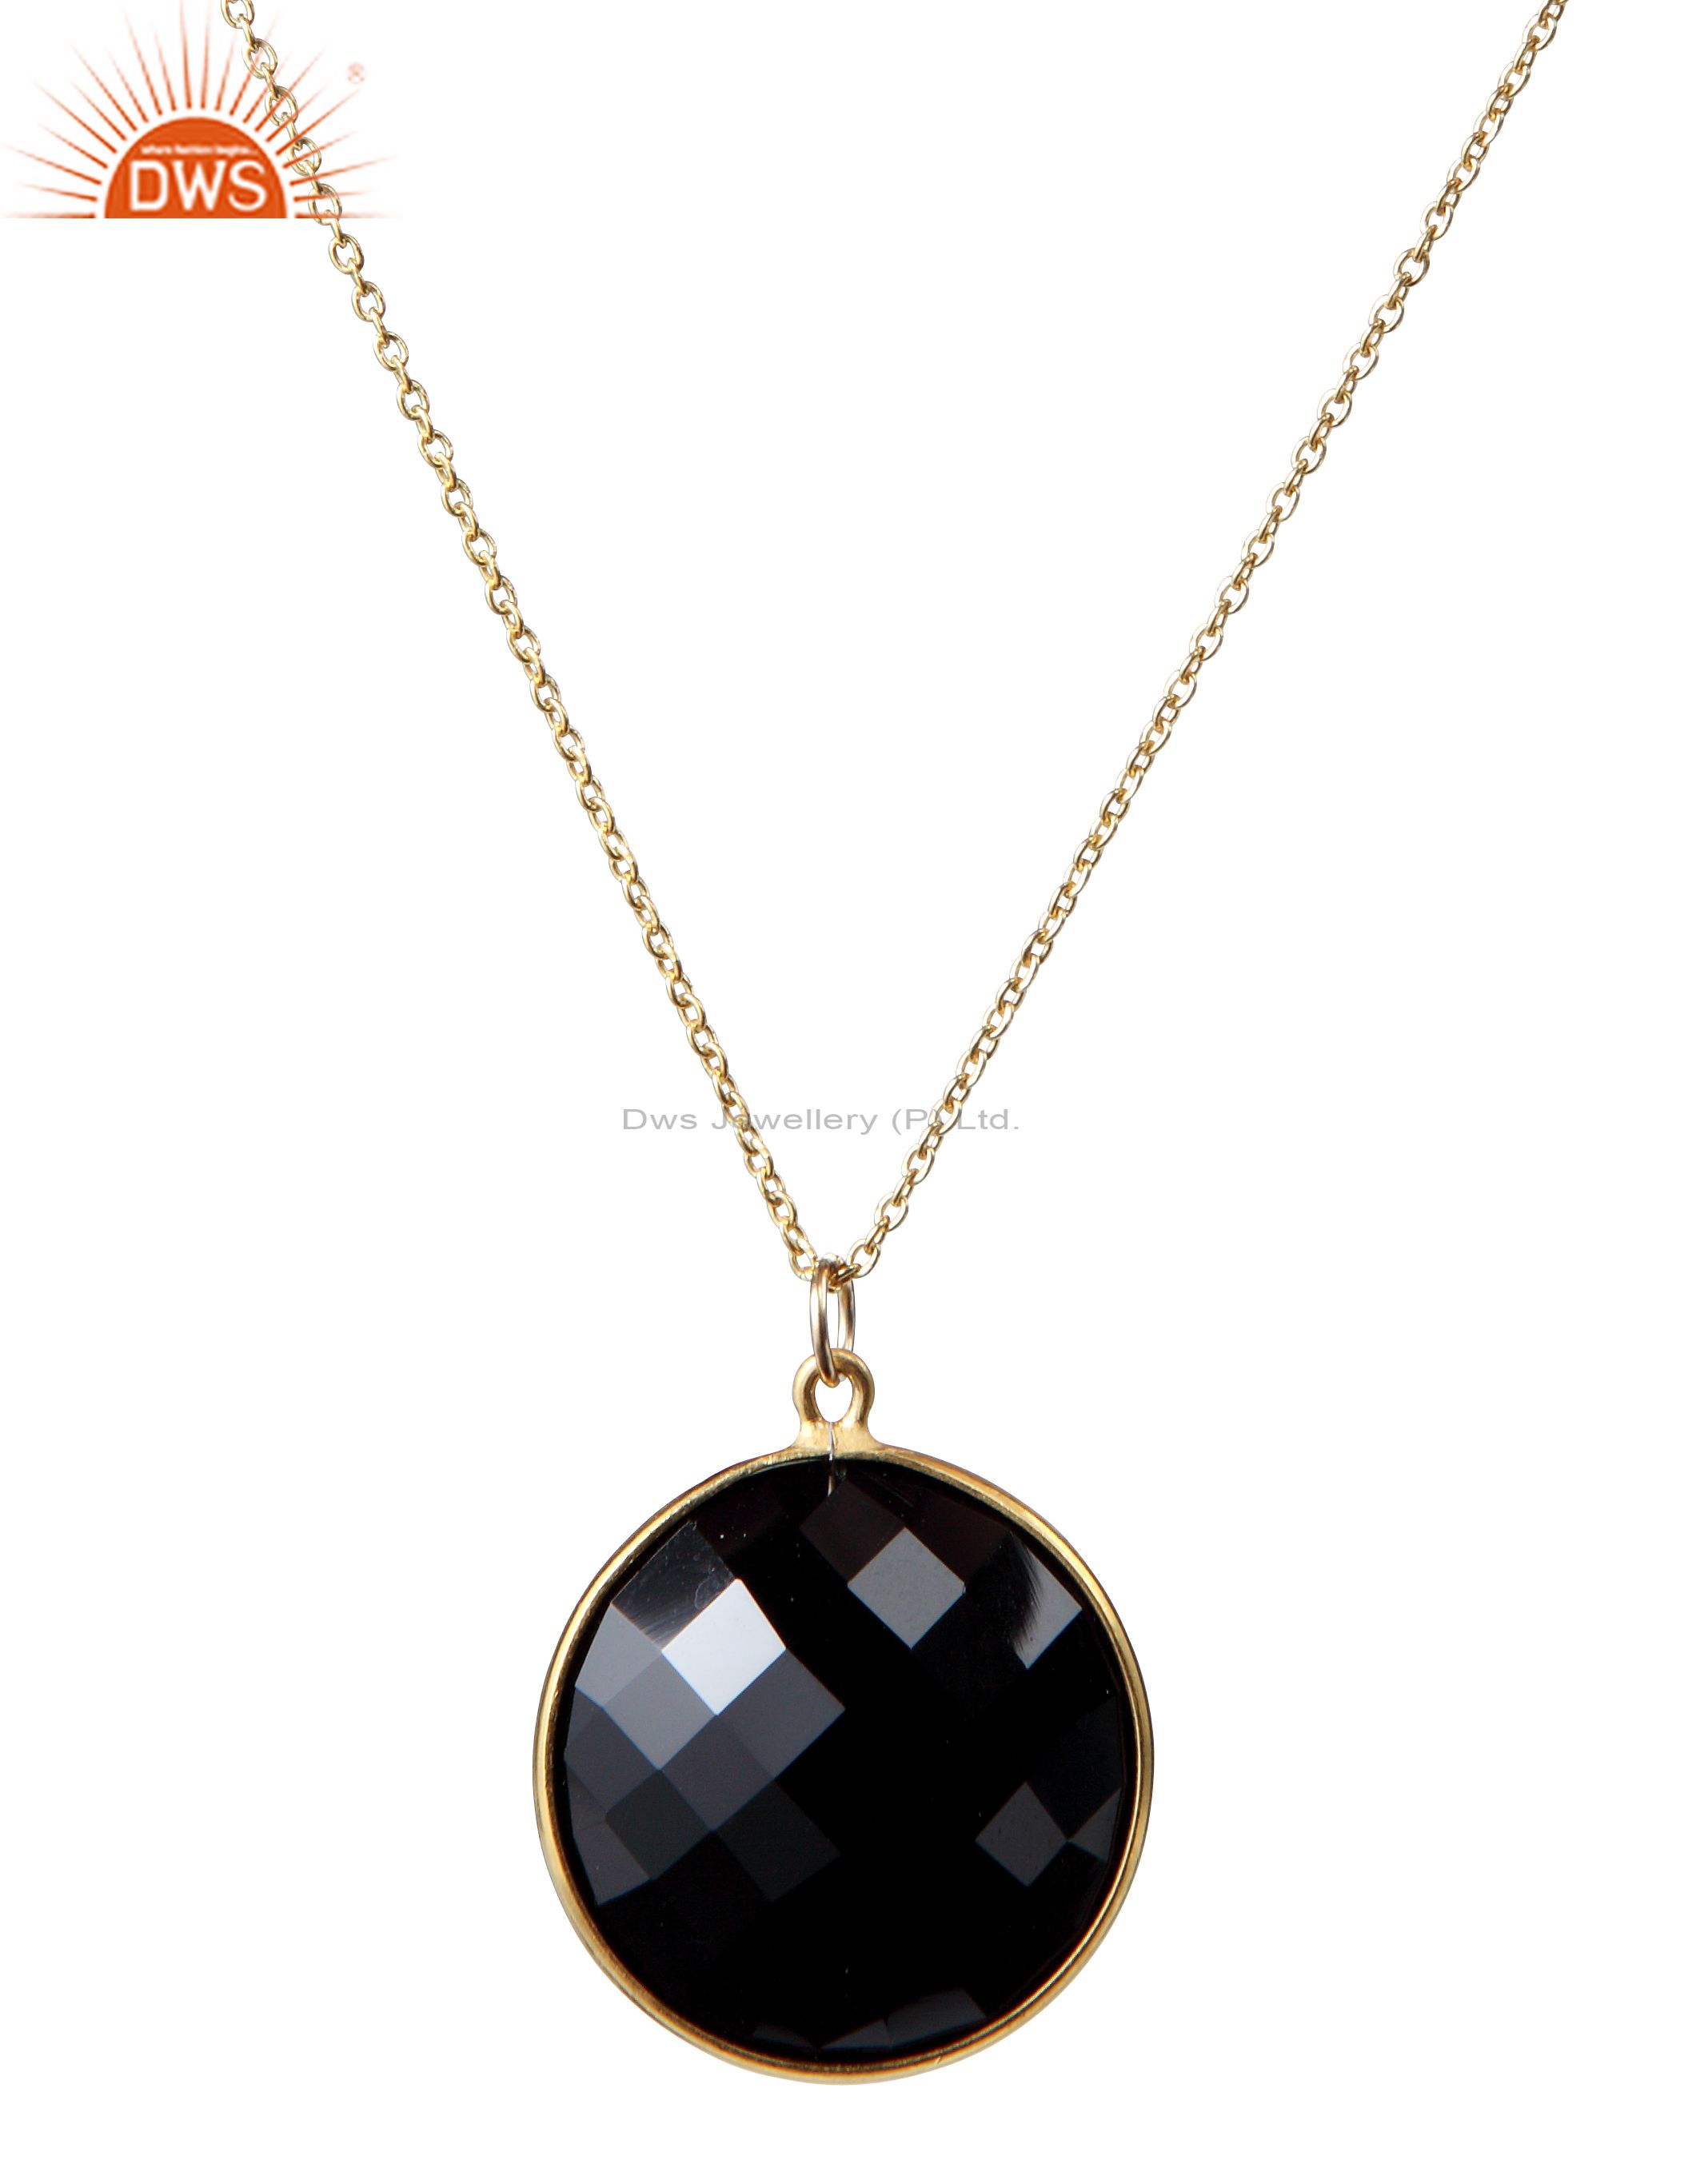 22k yellow gold plated sterling silver black onyx bezel set pendant with chain